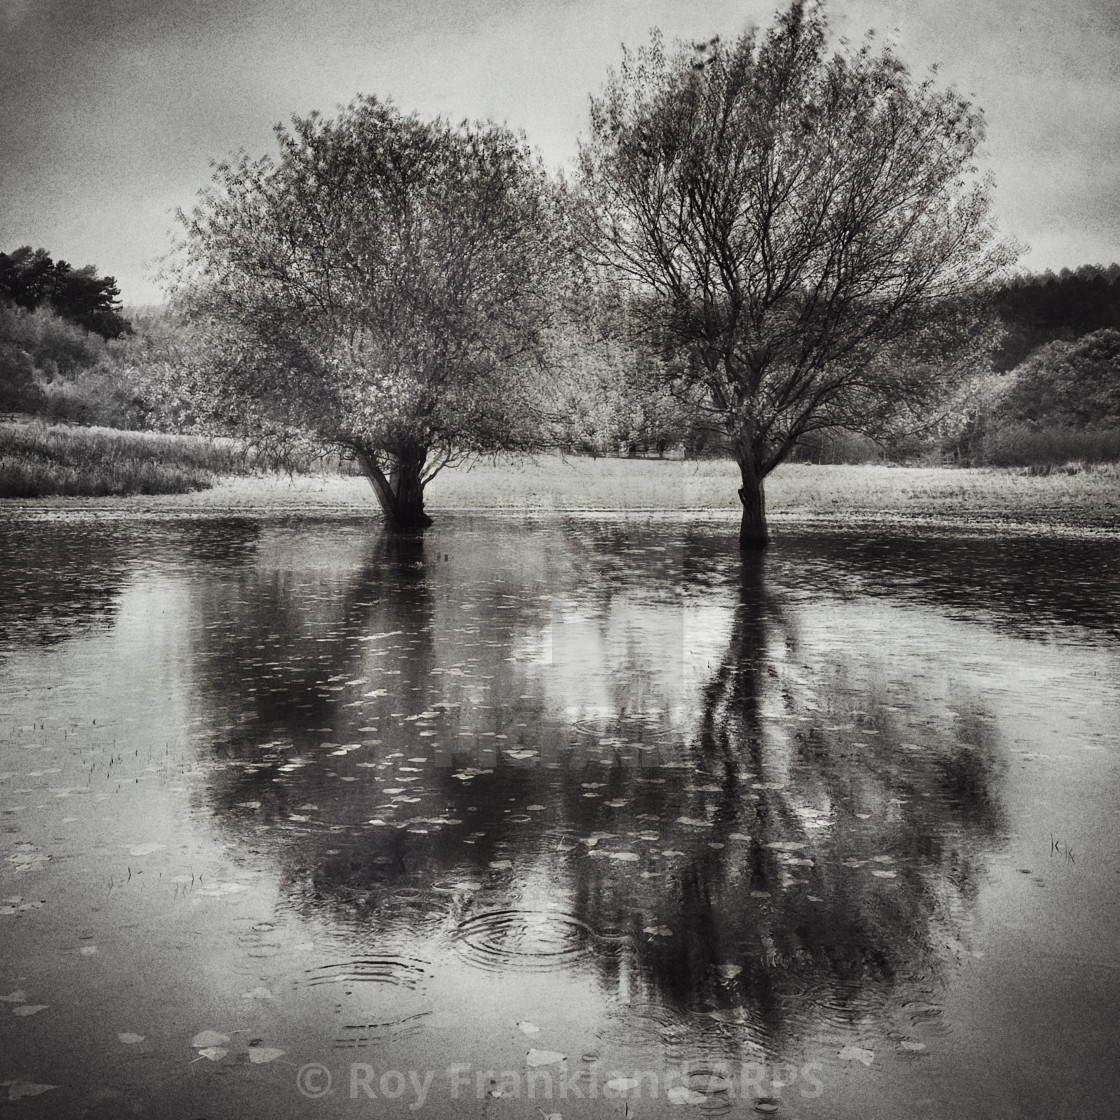 "Two trees in flooded field, mono" stock image